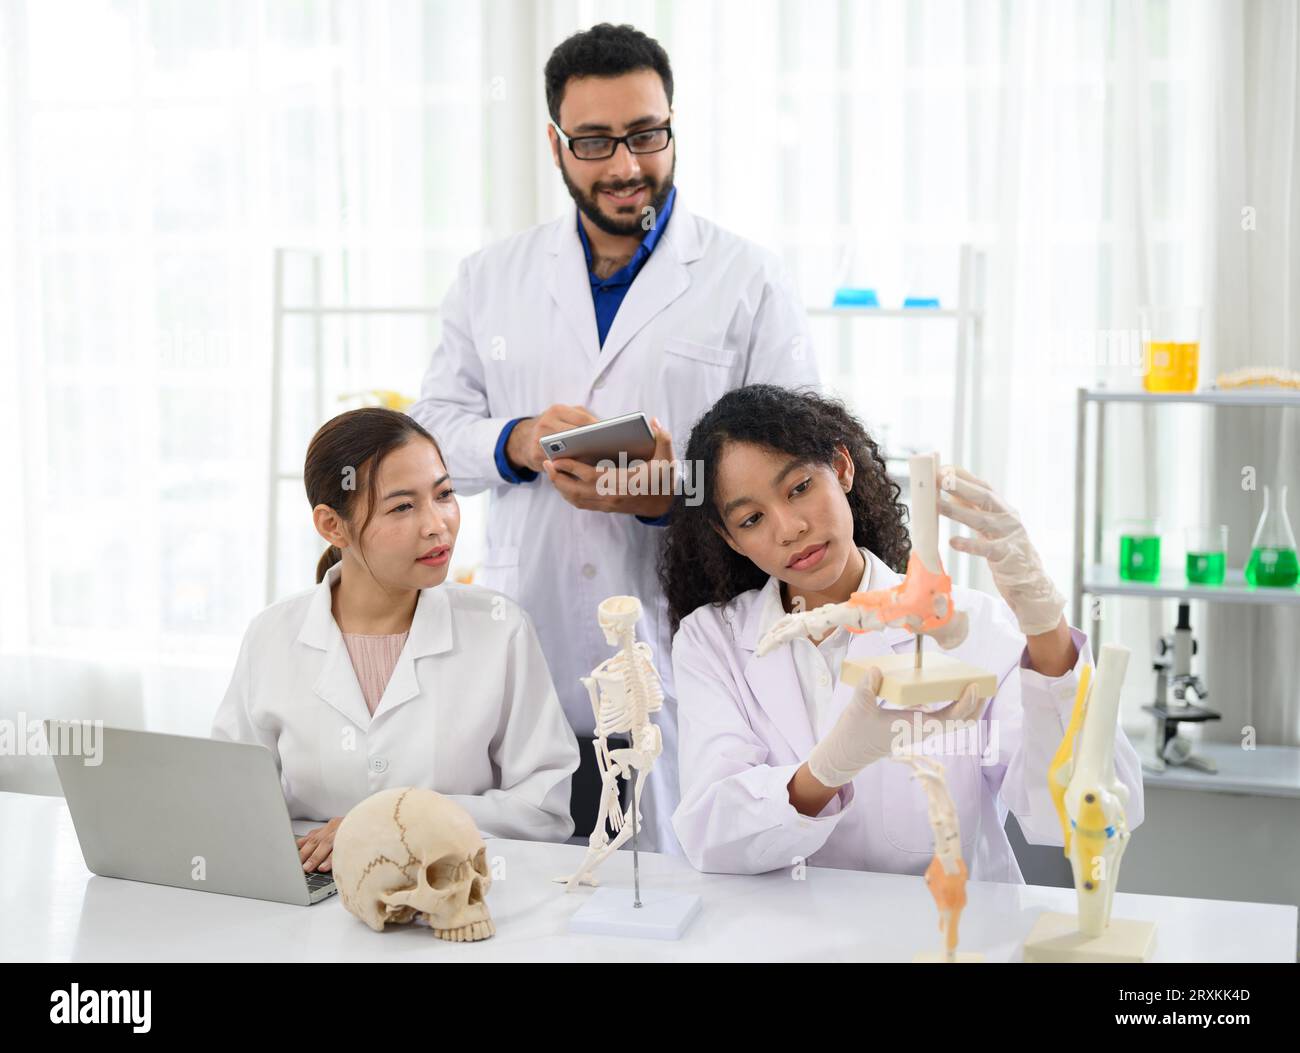 Scientist team study and research about feet model anatomy Stock Photo